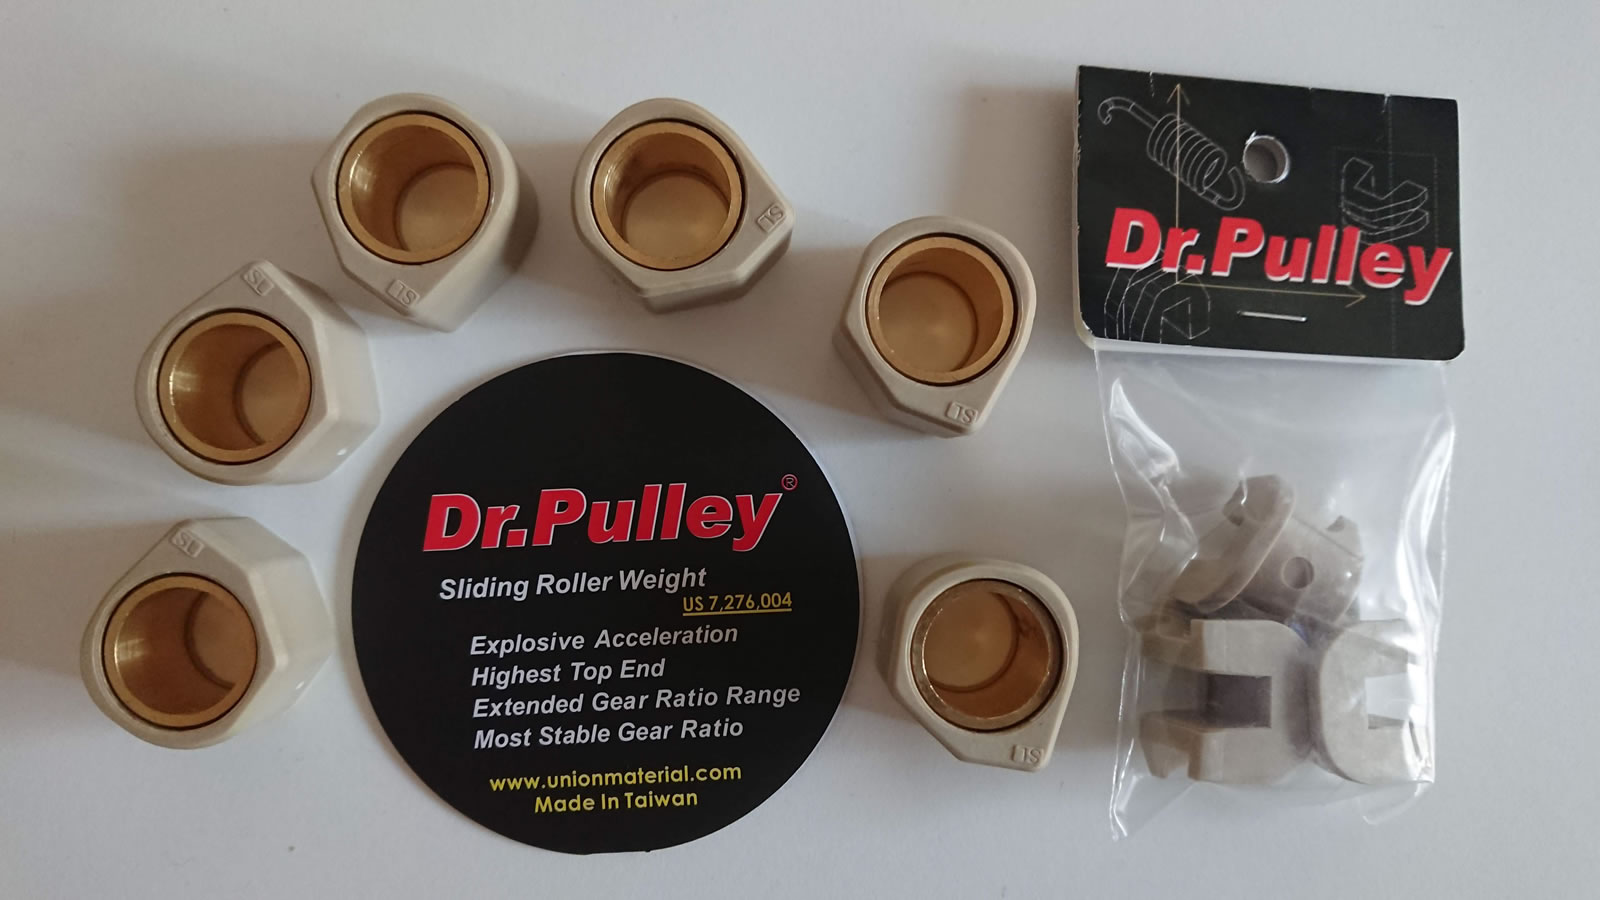 Dr Pulley's SP2418-K and SR2318/6-18